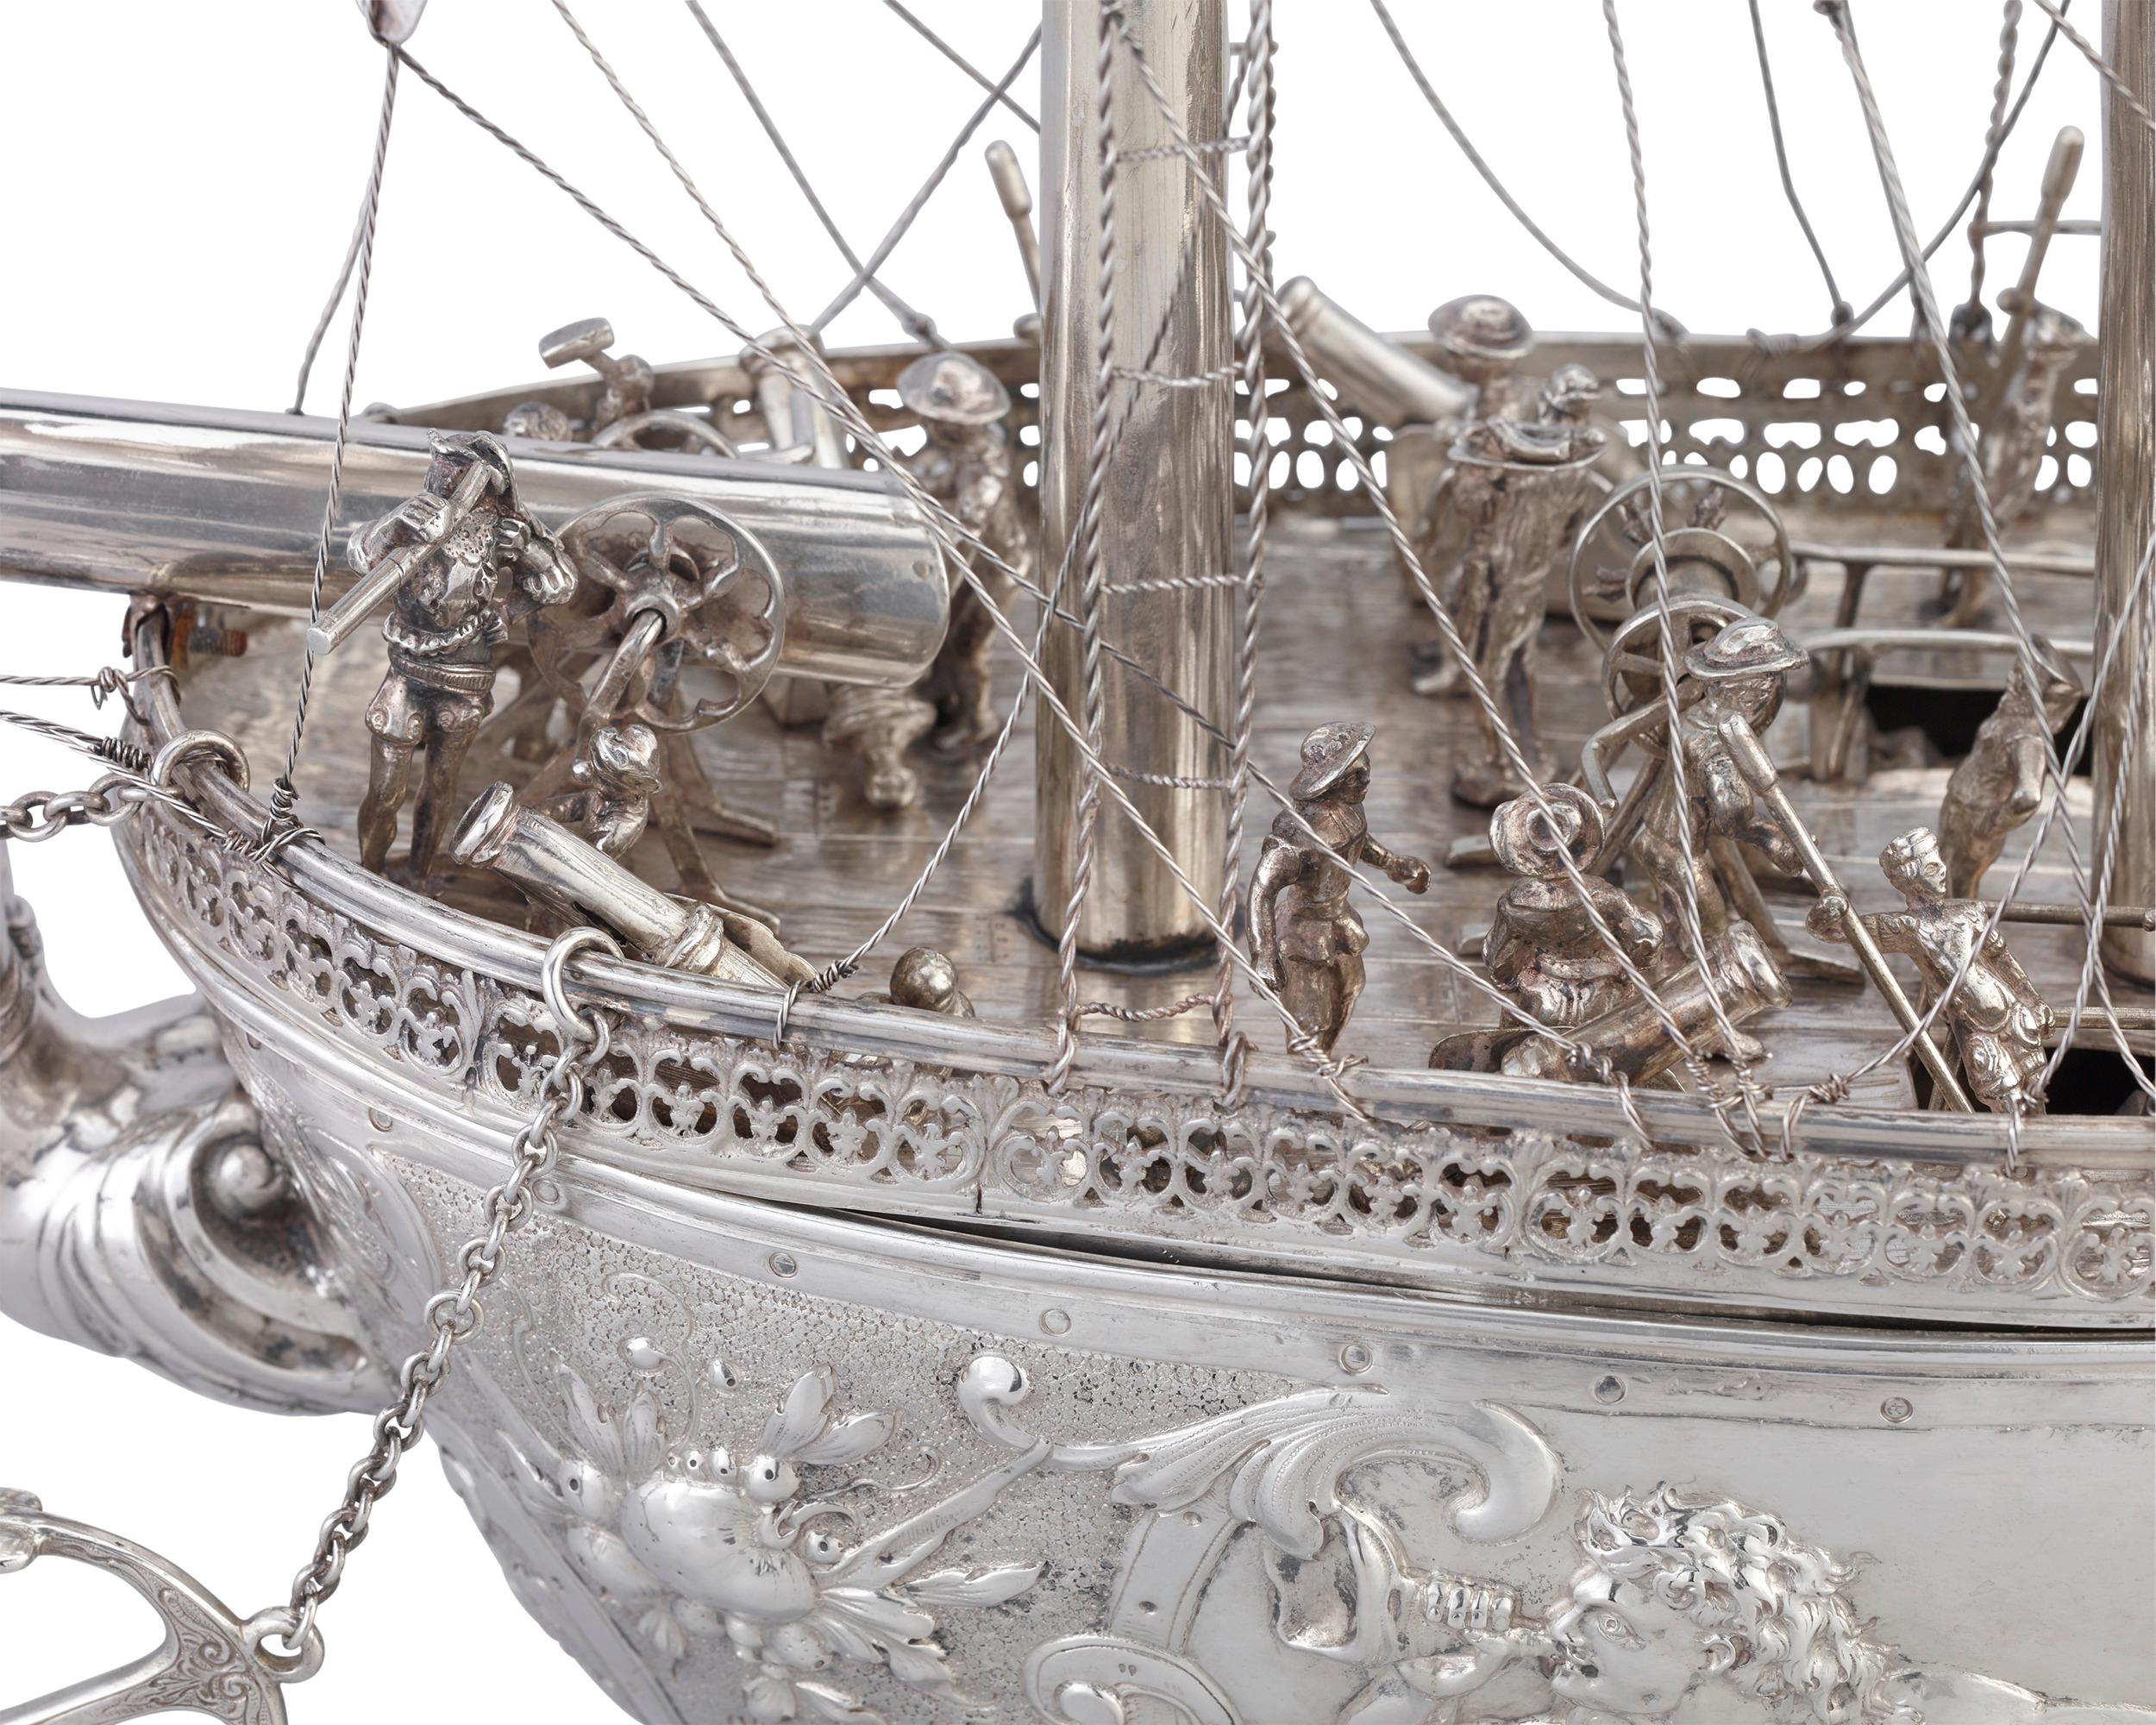 Measuring nearly three feet in length, this monumental silver nef is a spectacular example of German silverwork from the town of Hanau. It is masterfully crafted, with three masts and a deck fully manned and rigged with sailor figures. Mermen, putti